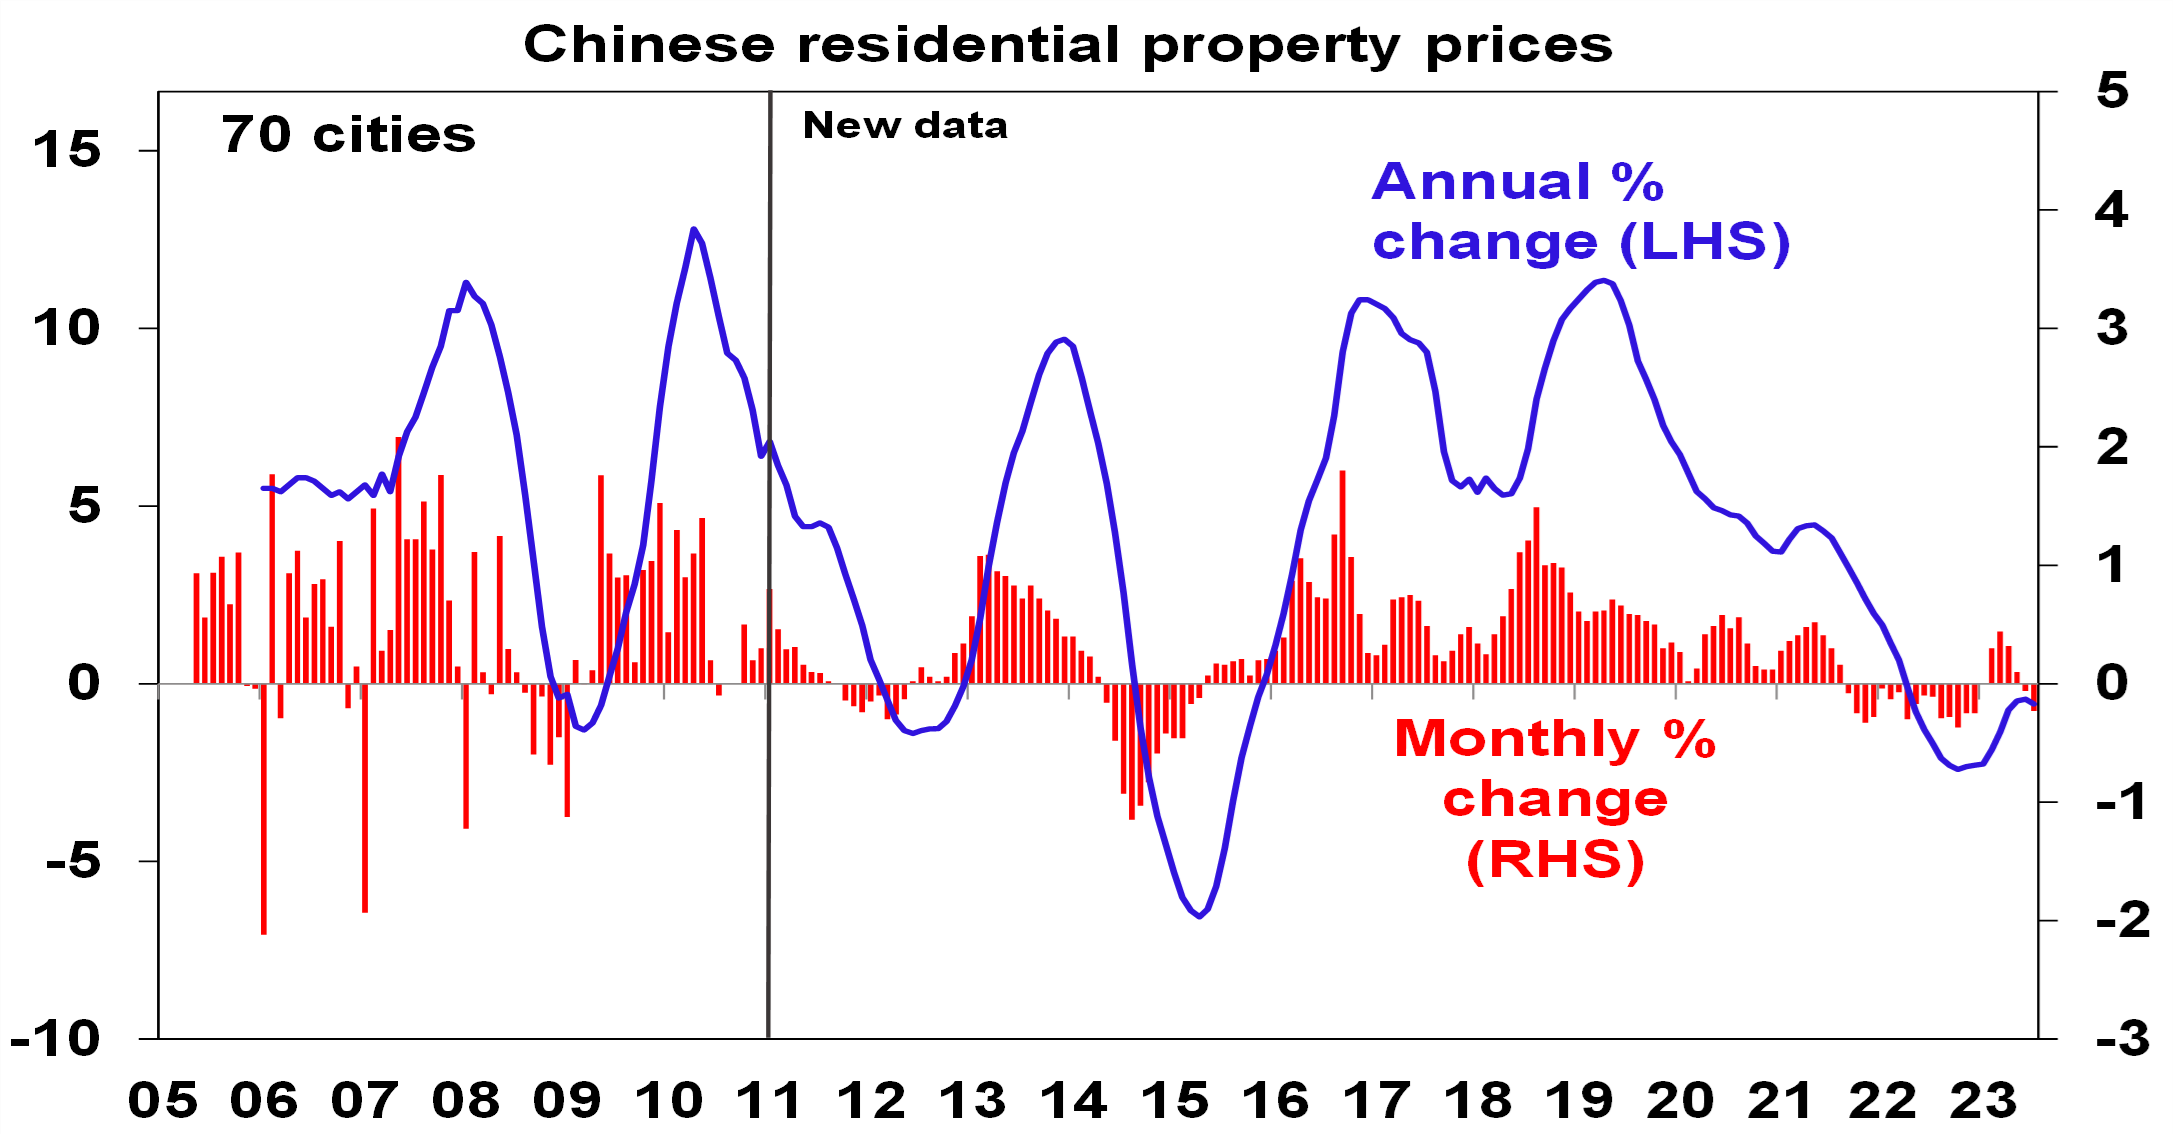 Chinese residential property prices